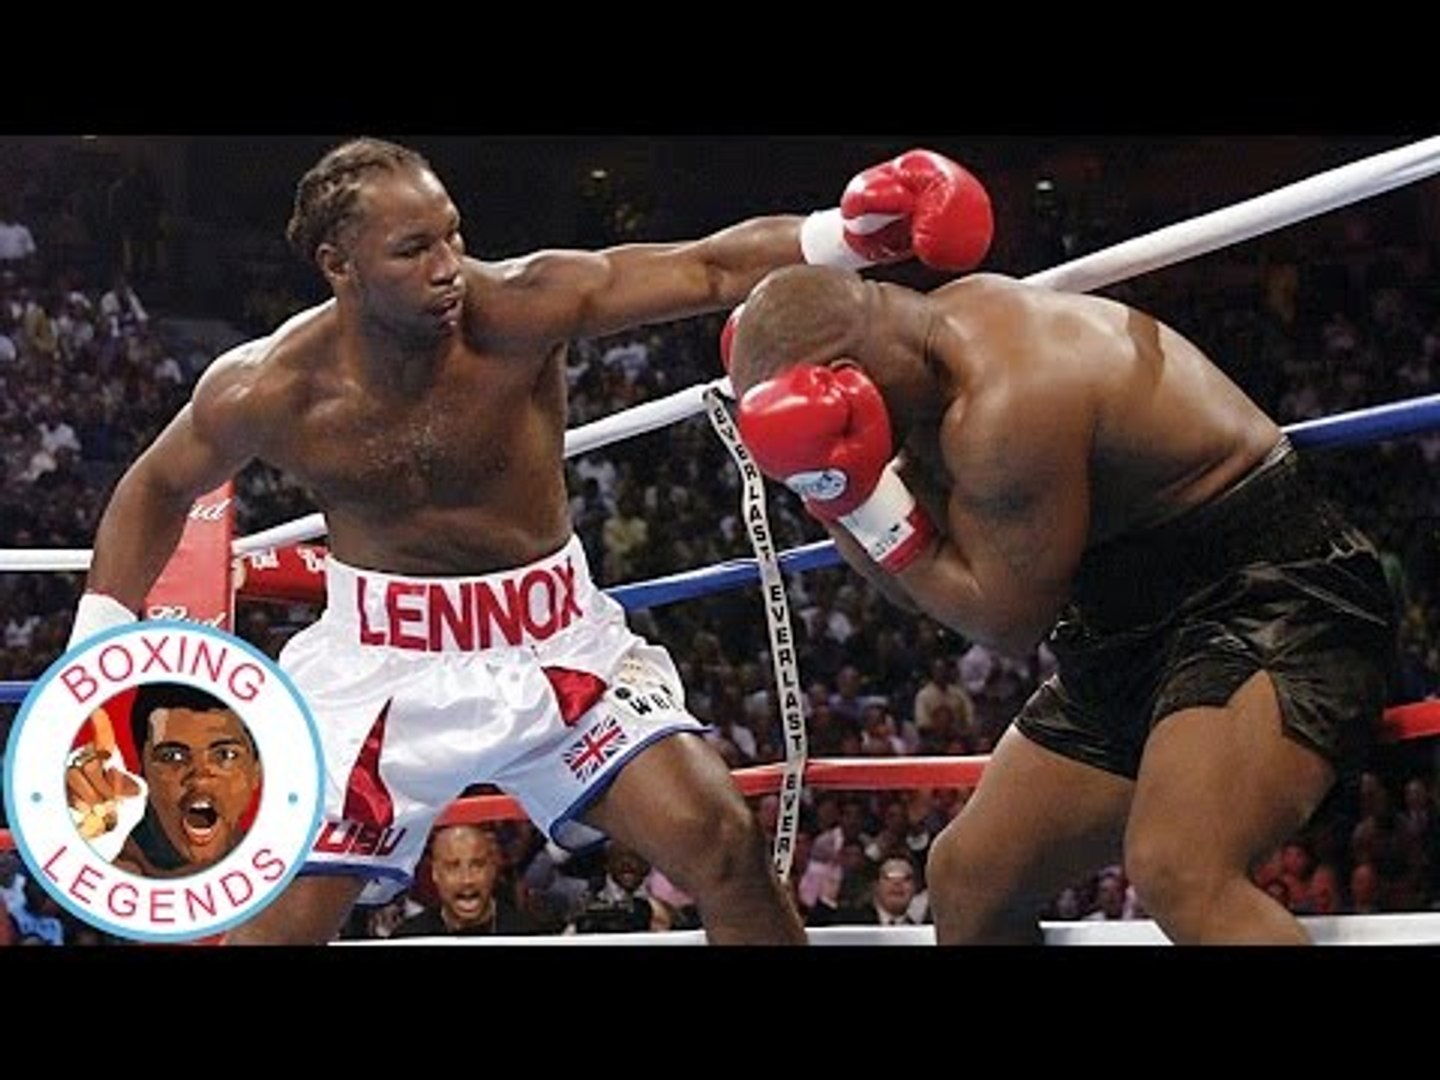 Mike Tyson vs Lennox Lewis (Highlights) - video Dailymotion